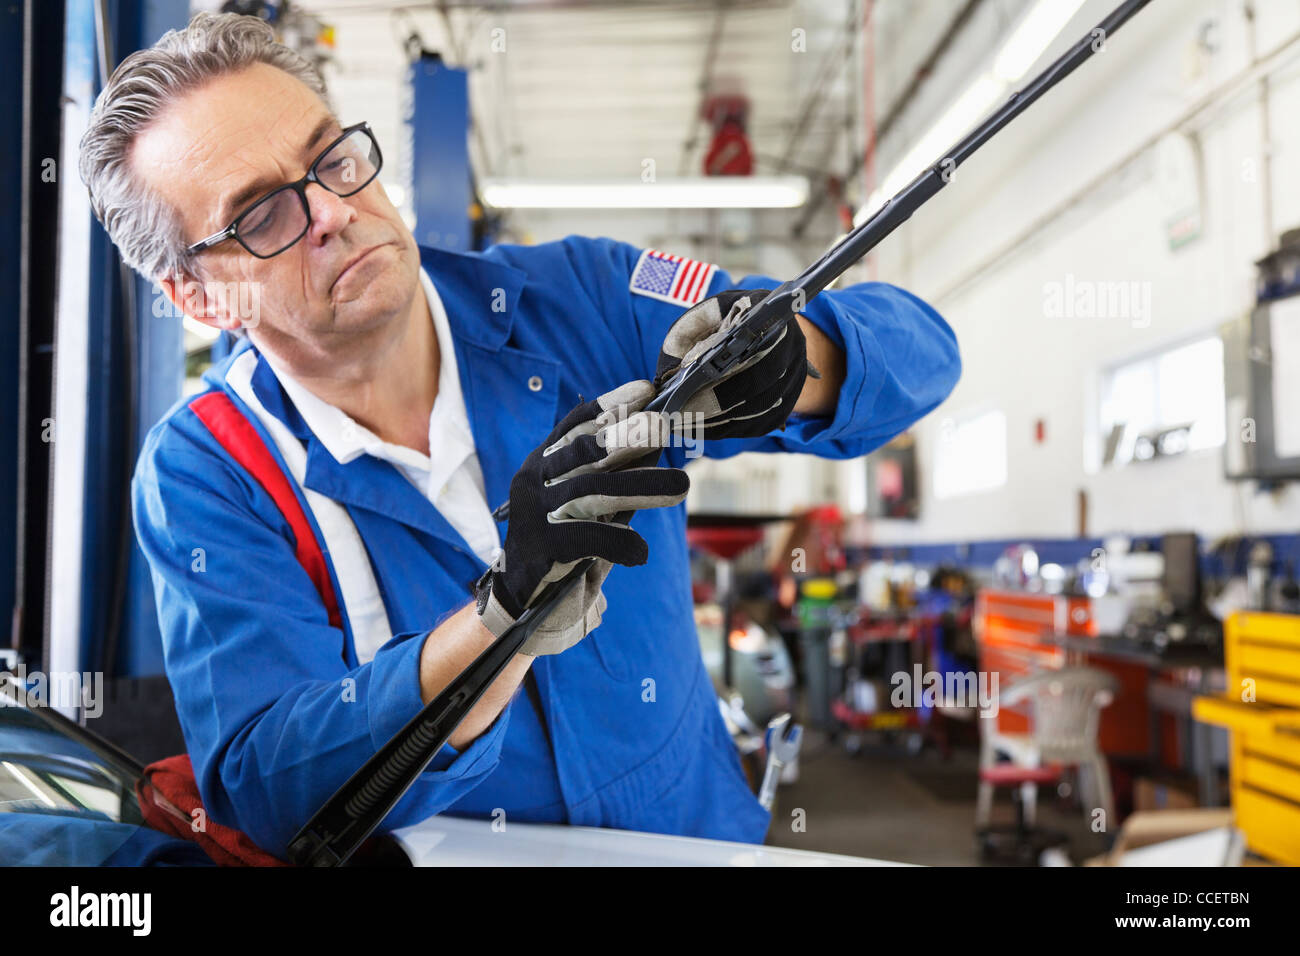 Mechanic working on windshield wipers of car Stock Photo